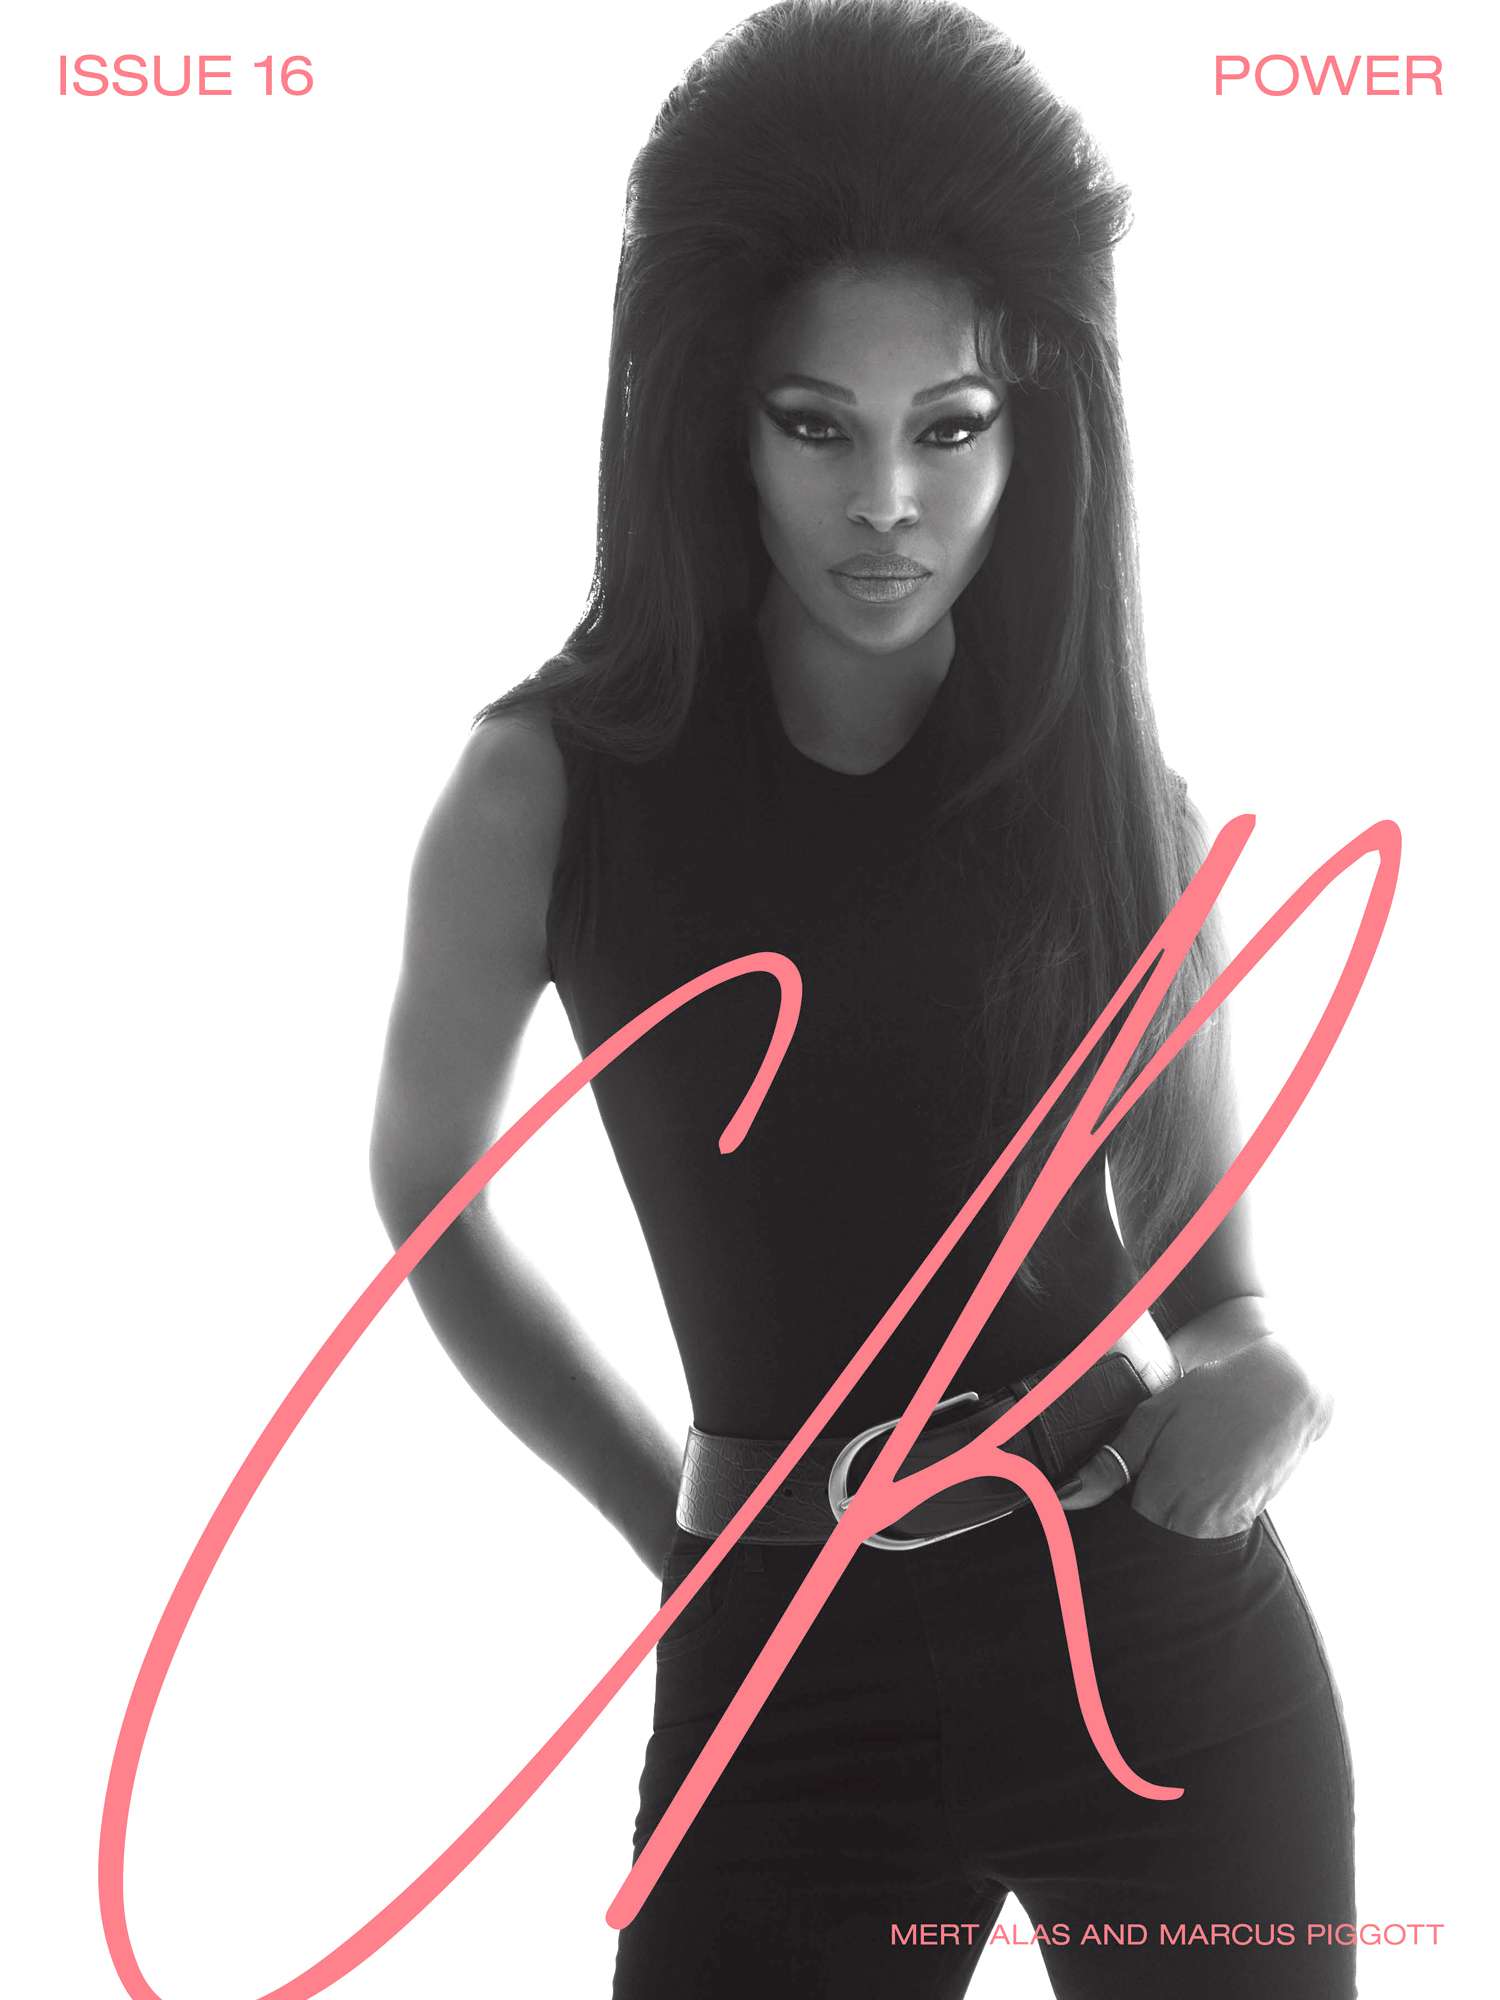 Naomi Campbell shot by Mert and Marcus for CR Fashion Book Issue 16